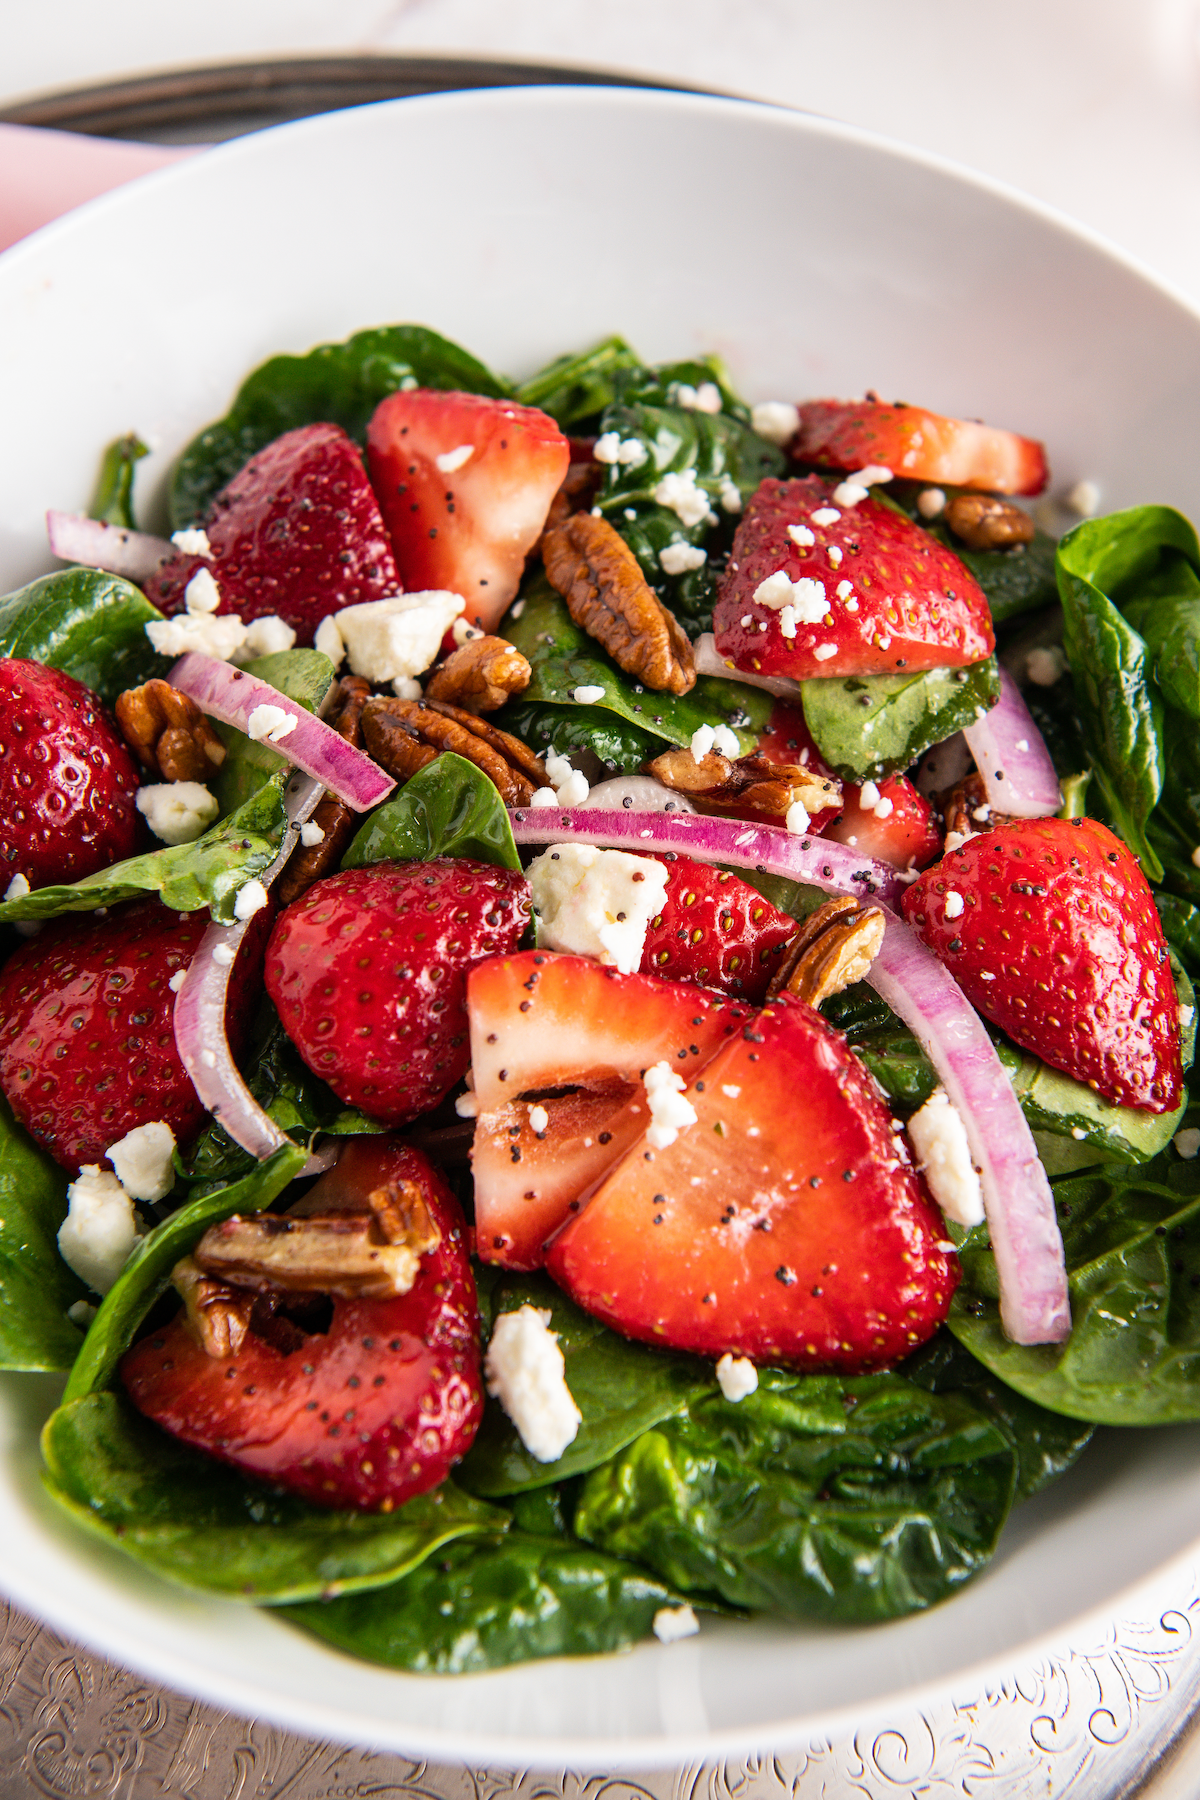 Spinach salad with strawberries, red onion, and feta cheese.